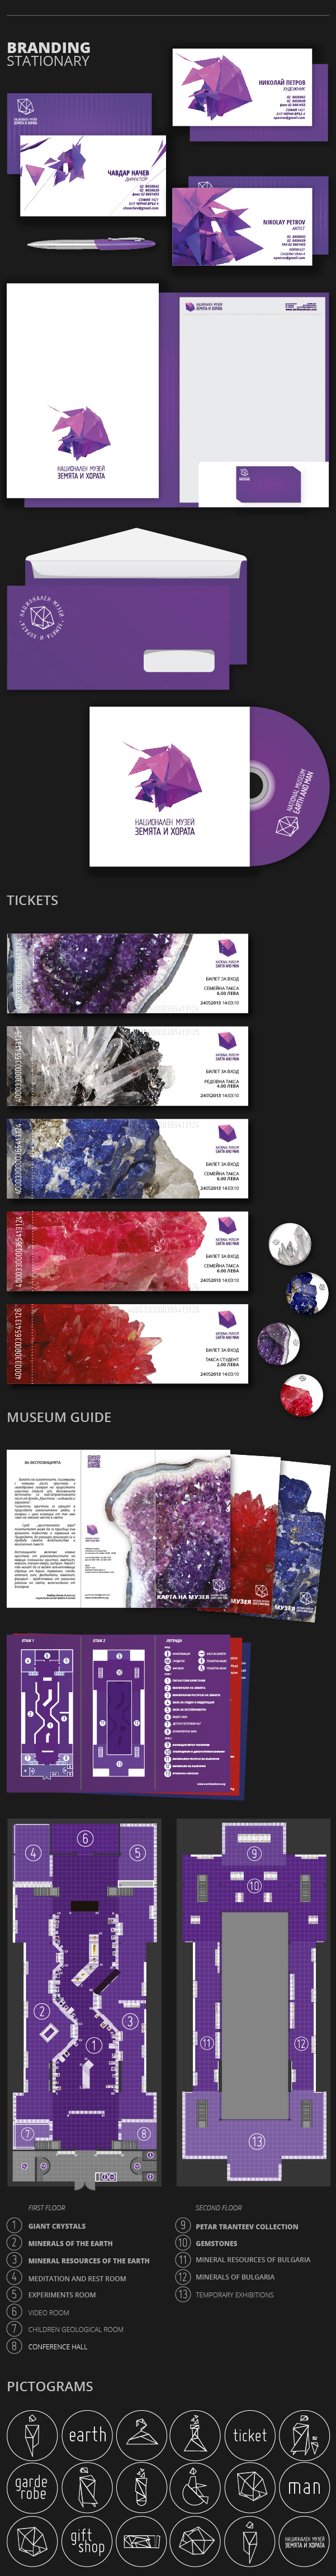 national museum earth and man crystal mineral gem stone ticket map shirt print poster design